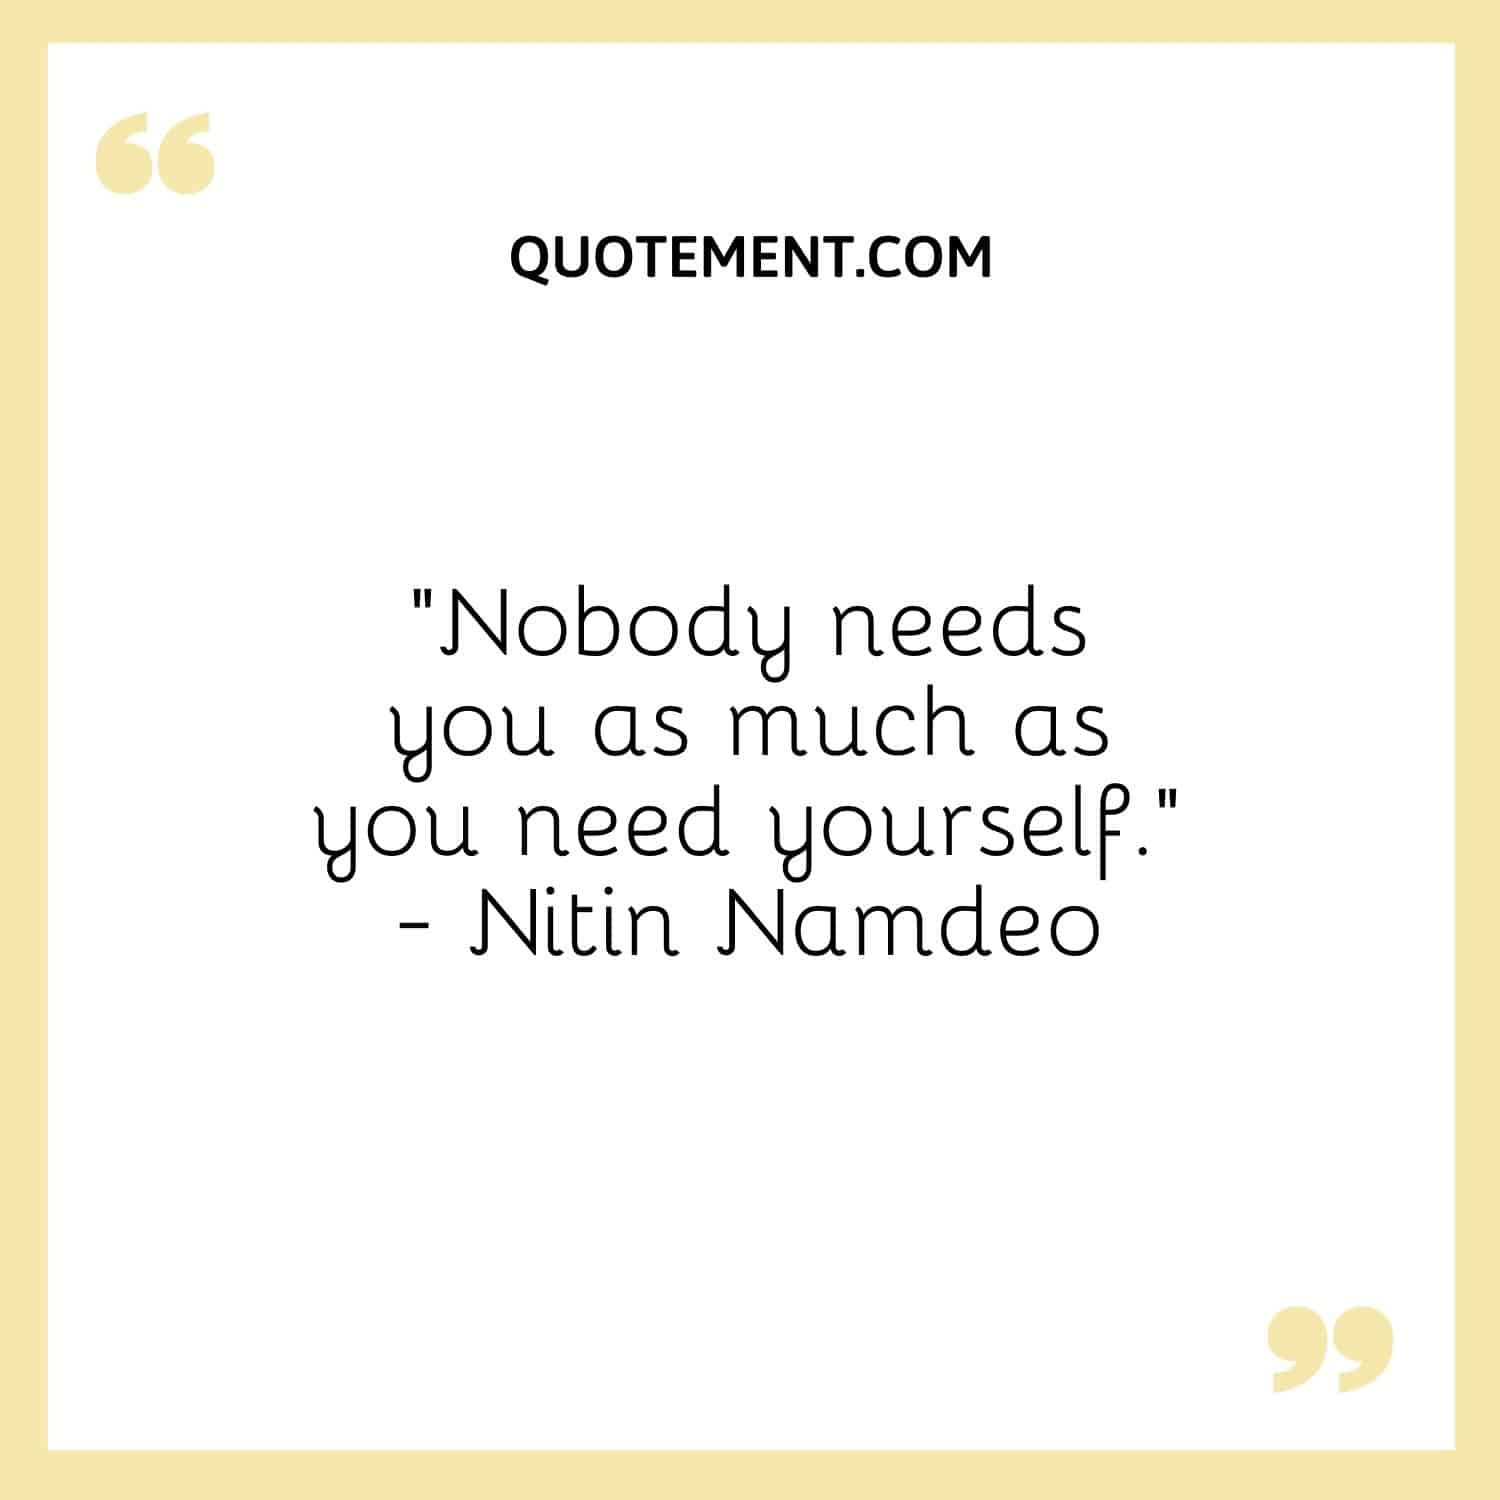 Nobody needs you as much as you need yourself